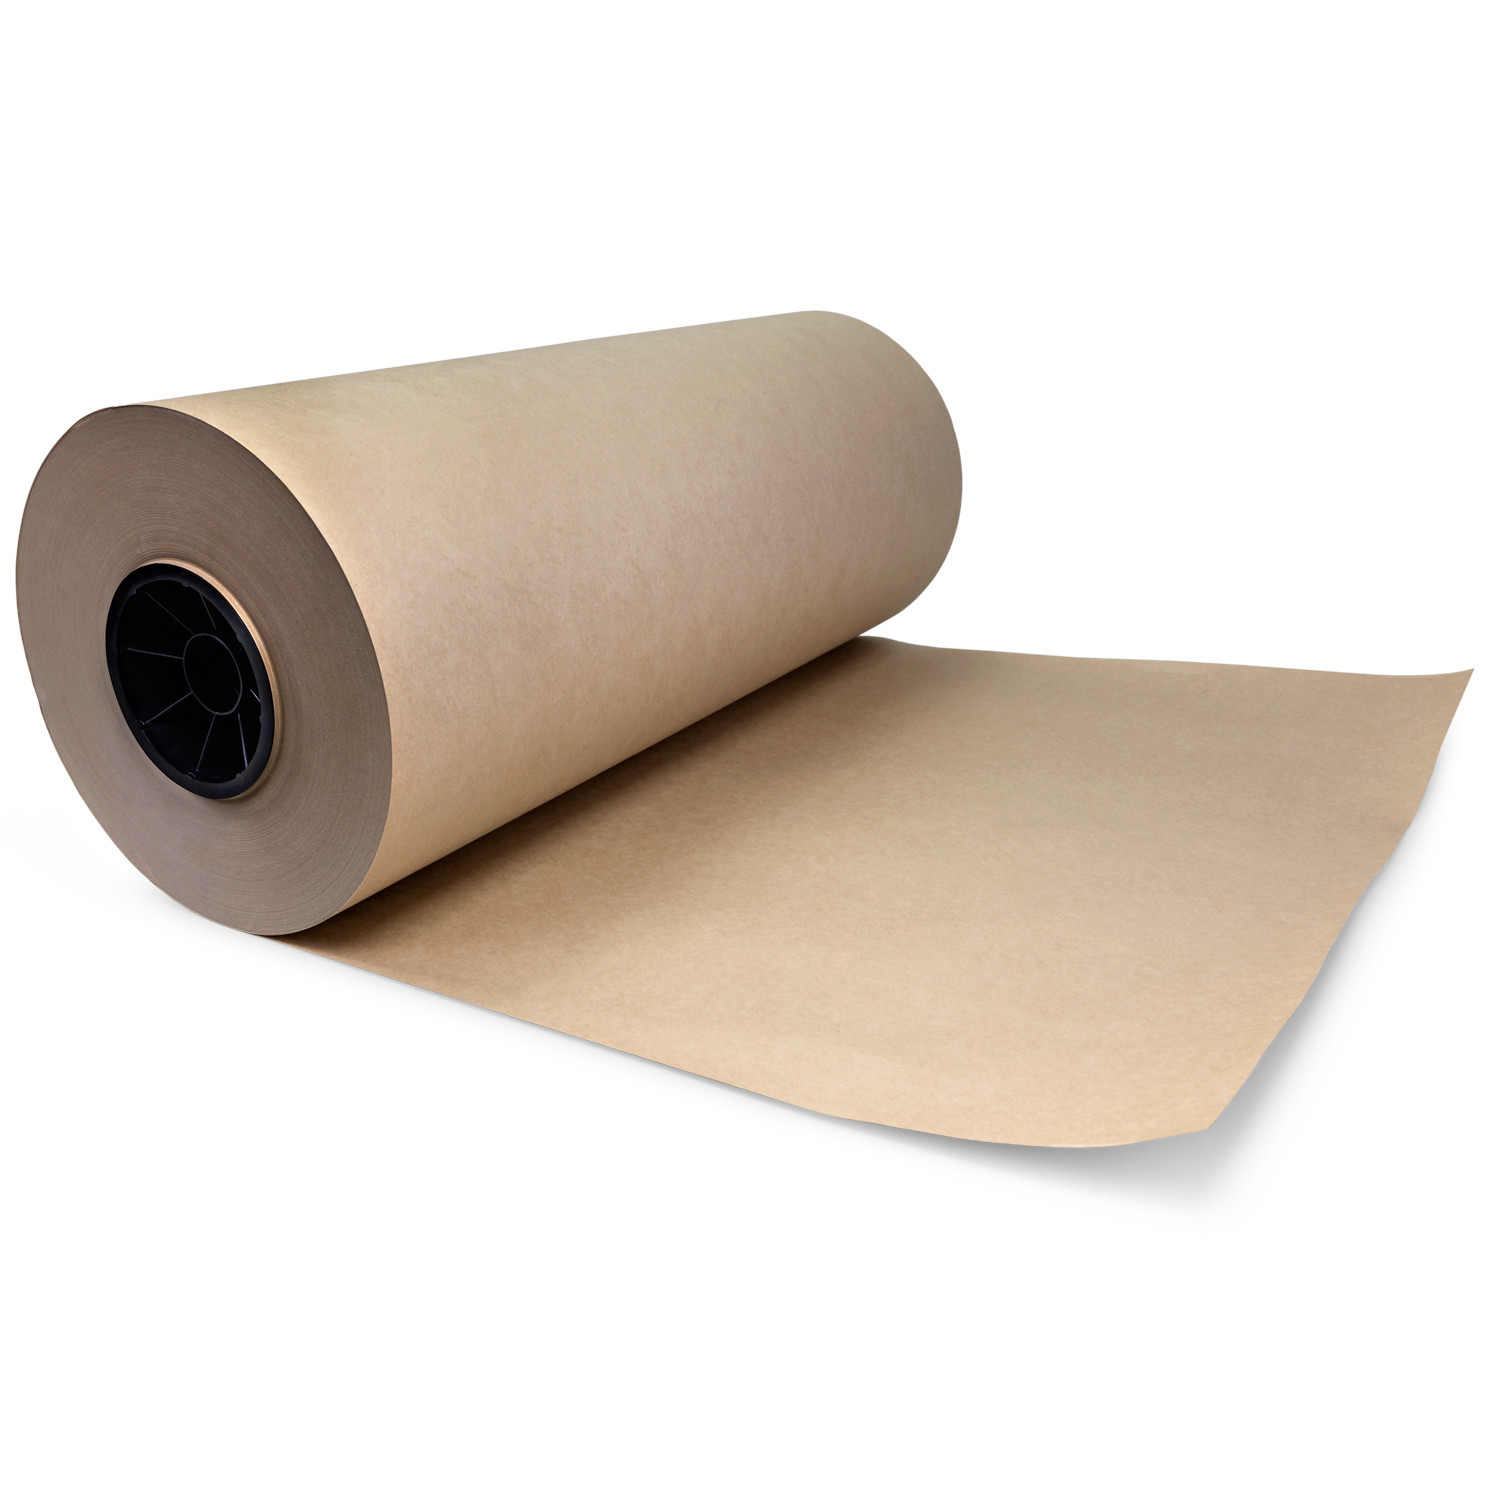 Brown Butcher Paper - 18 x 150' - Butcher Paper Roll for Wrapping